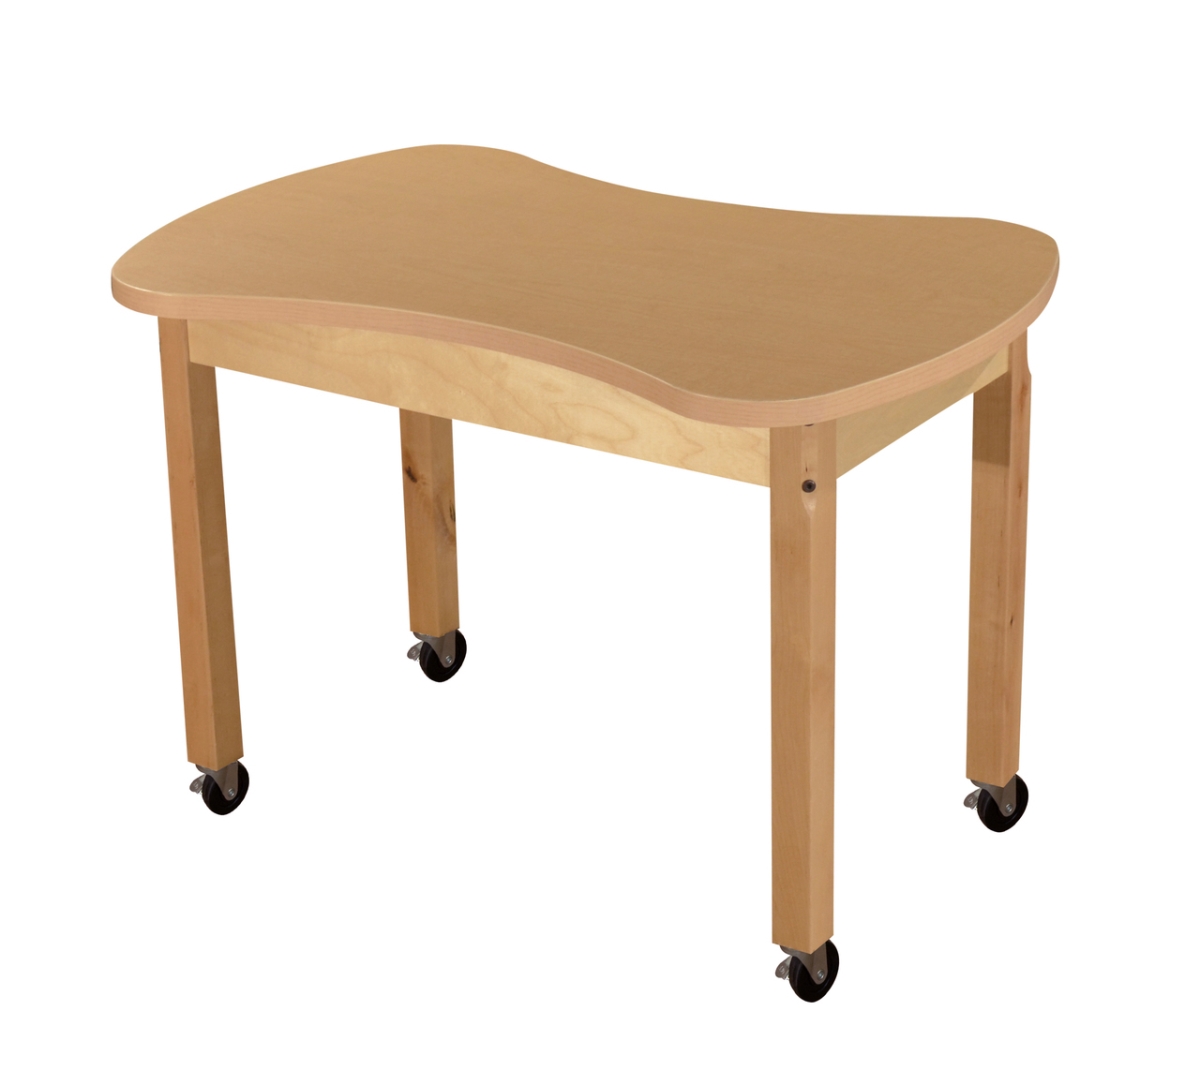 Picture of Wood Designs HPL2436C20C6 24 x 36 in. Mobile Synergy Junction, High Pressure Laminate Table with Hardwood Legs- 20 in.